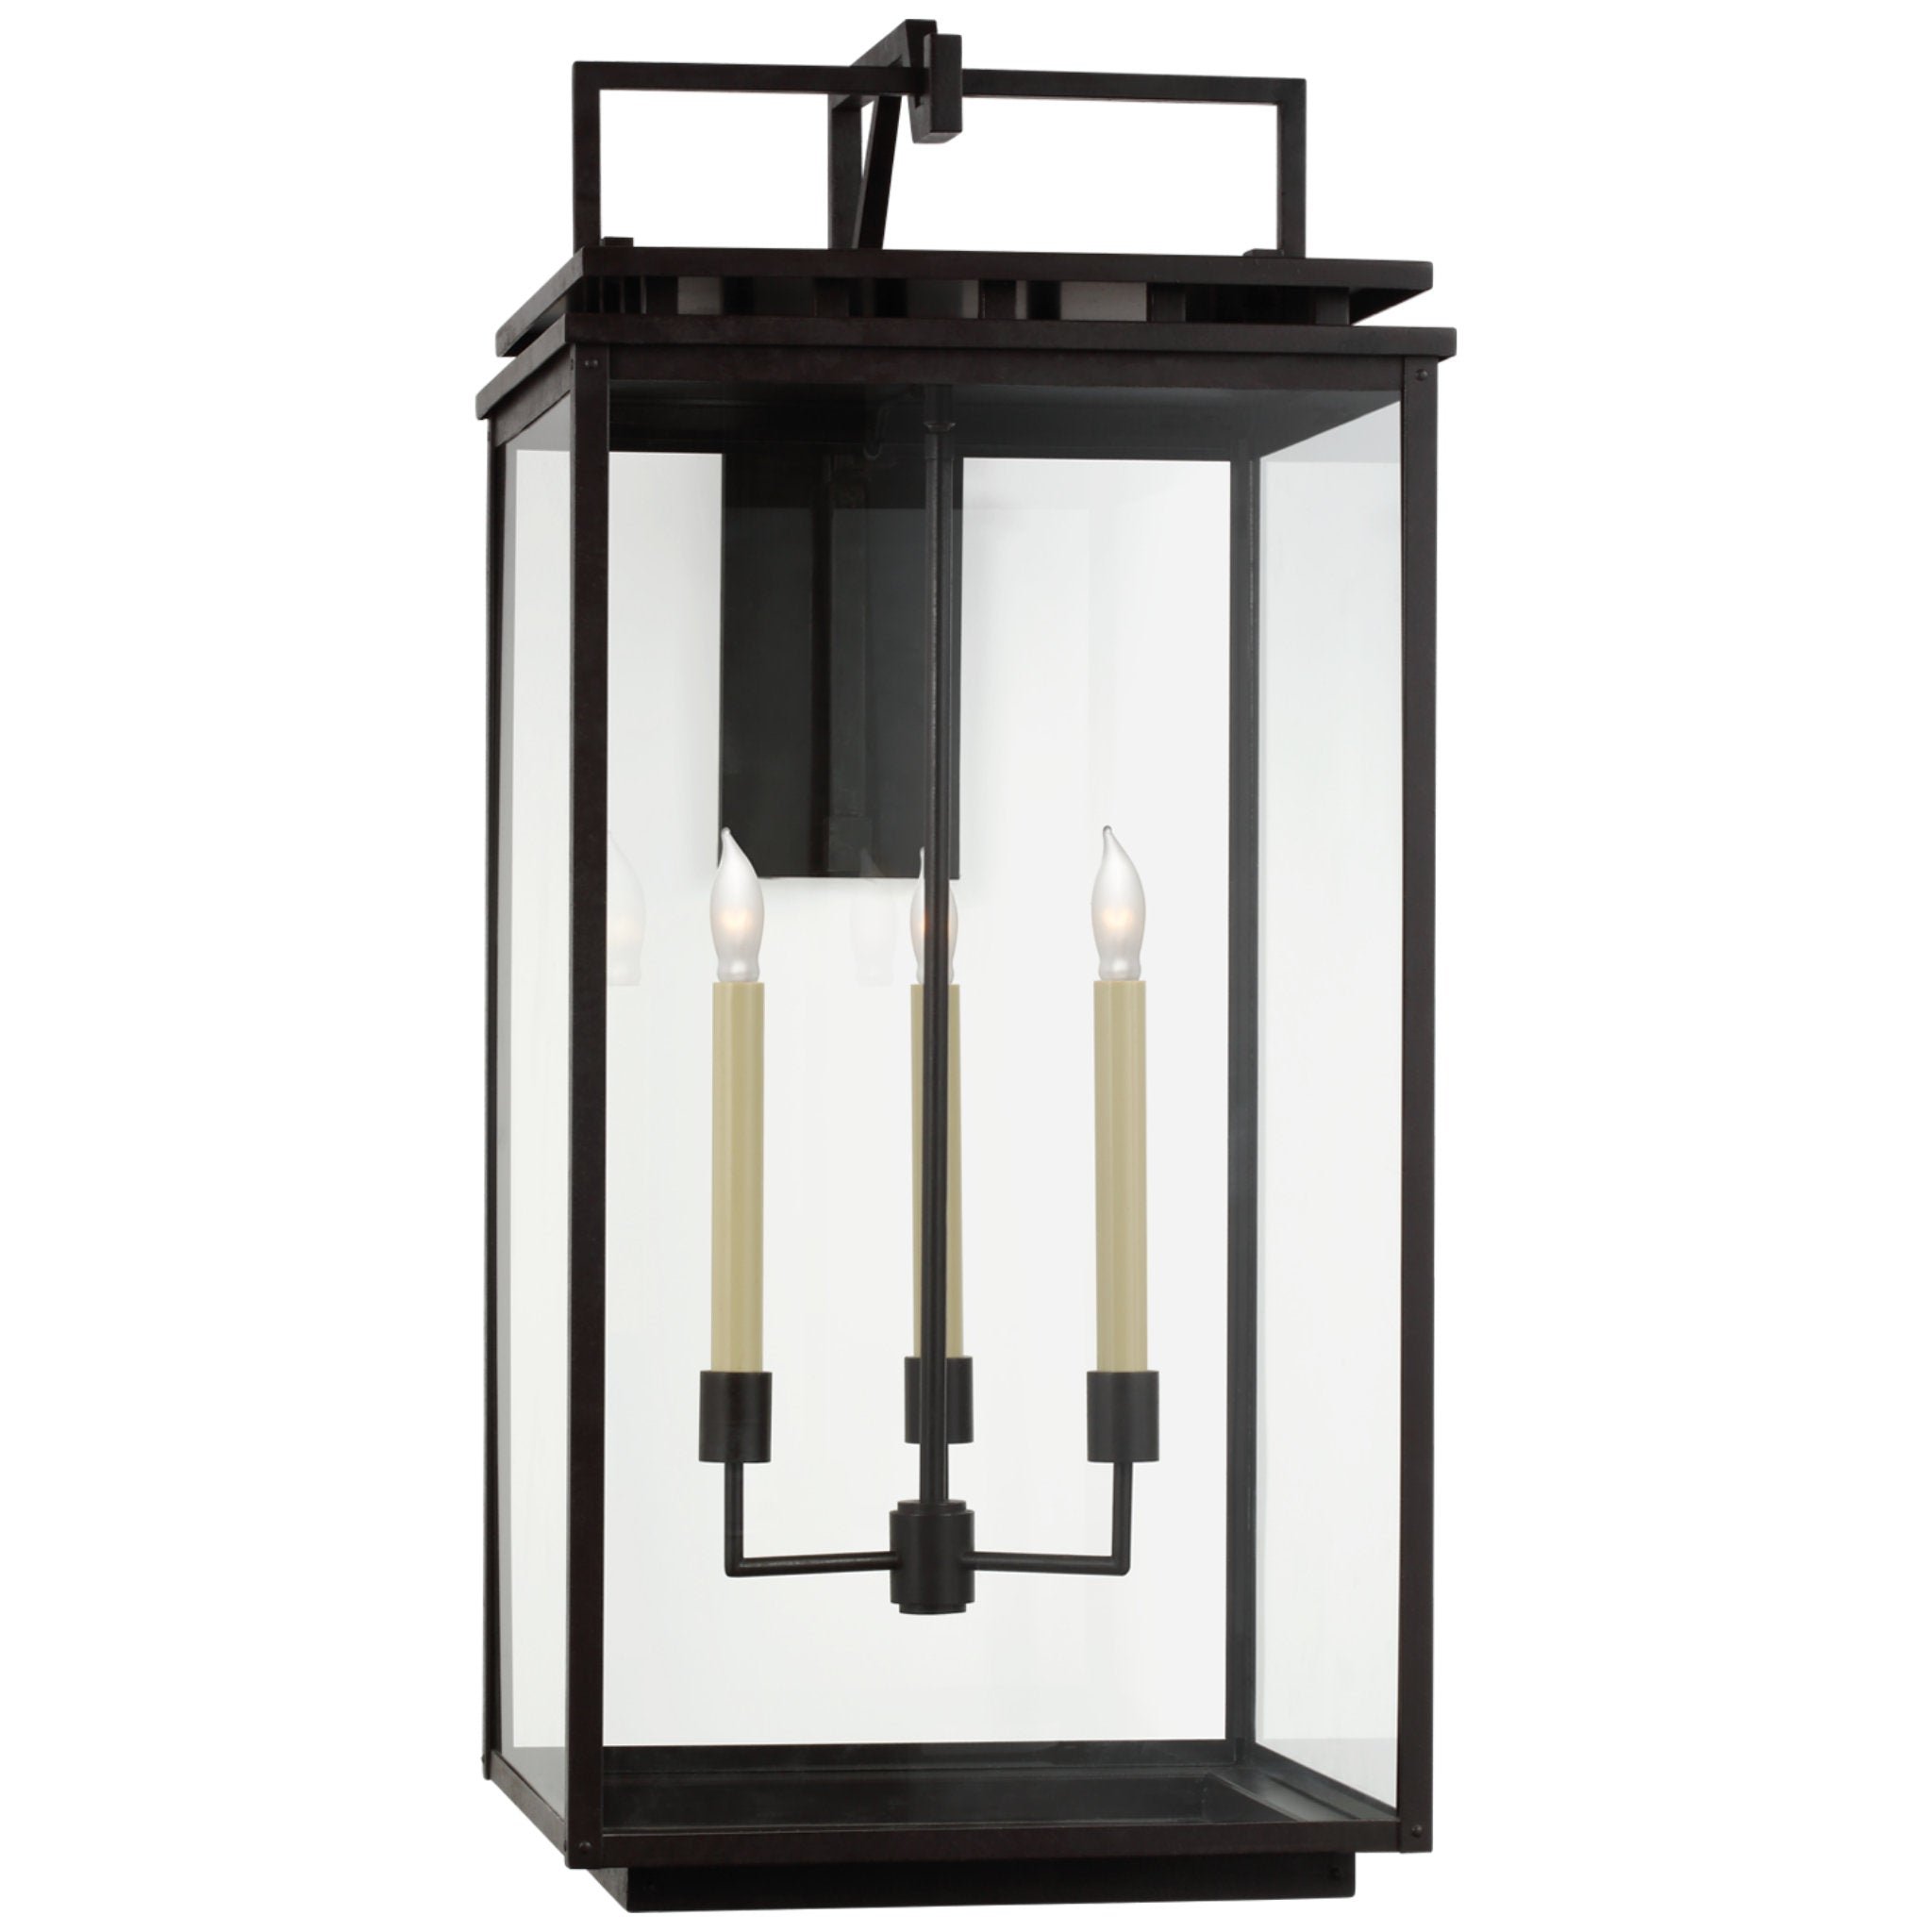 Chapman & Myers Cheshire Grande Bracketed Wall Lantern in Aged Iron with Clear Glass